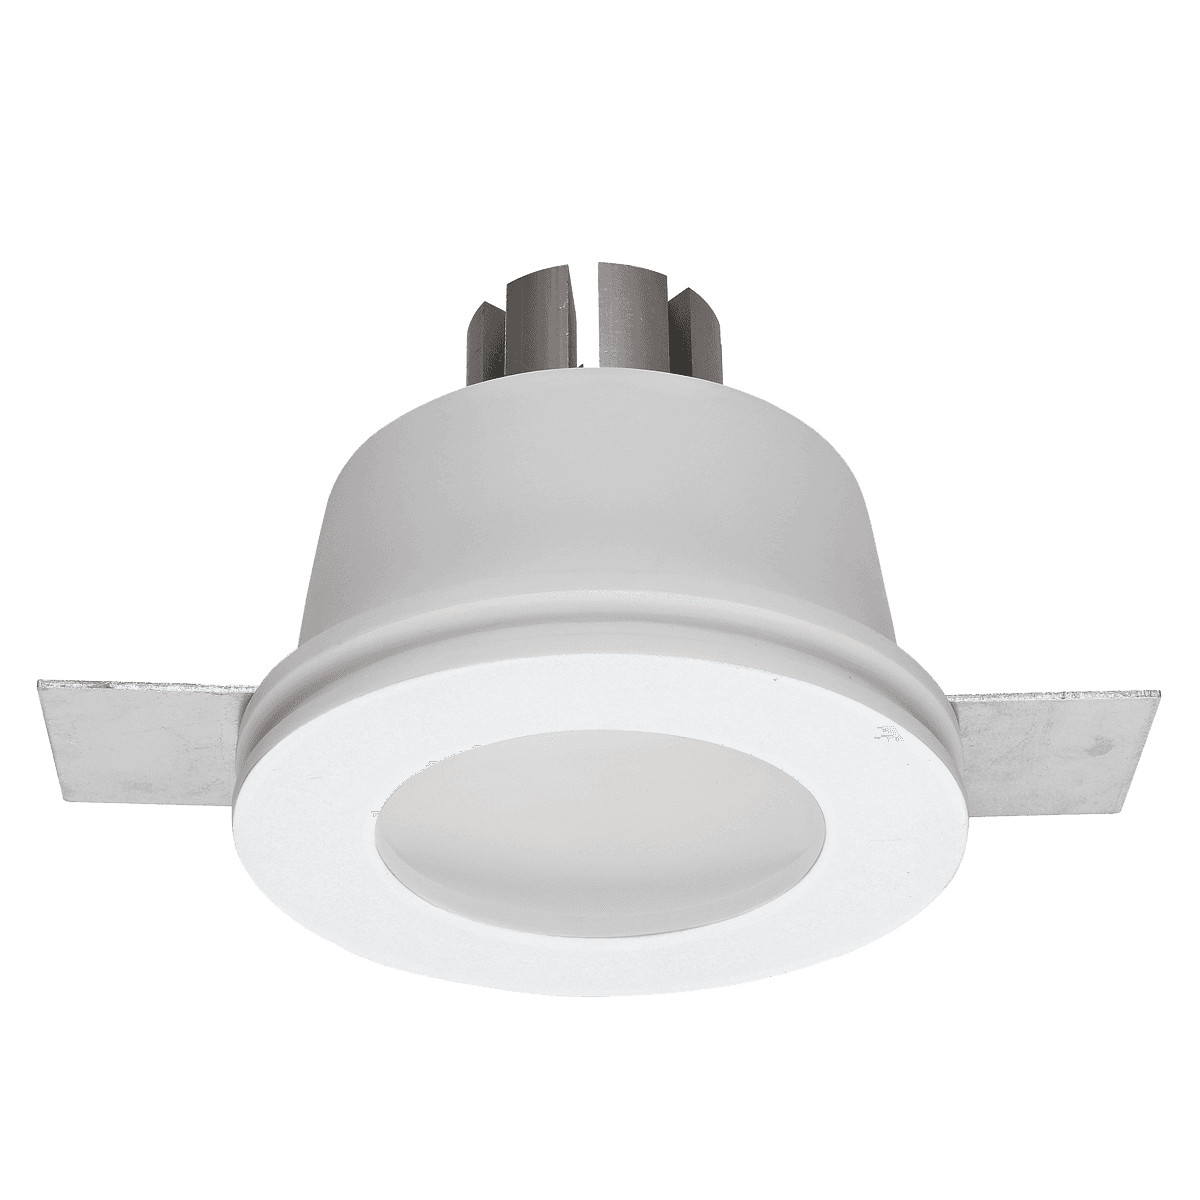 Gallery Product Gypsum Downlight Ceiling Wall Light Linealightgroup 1200X1200 2